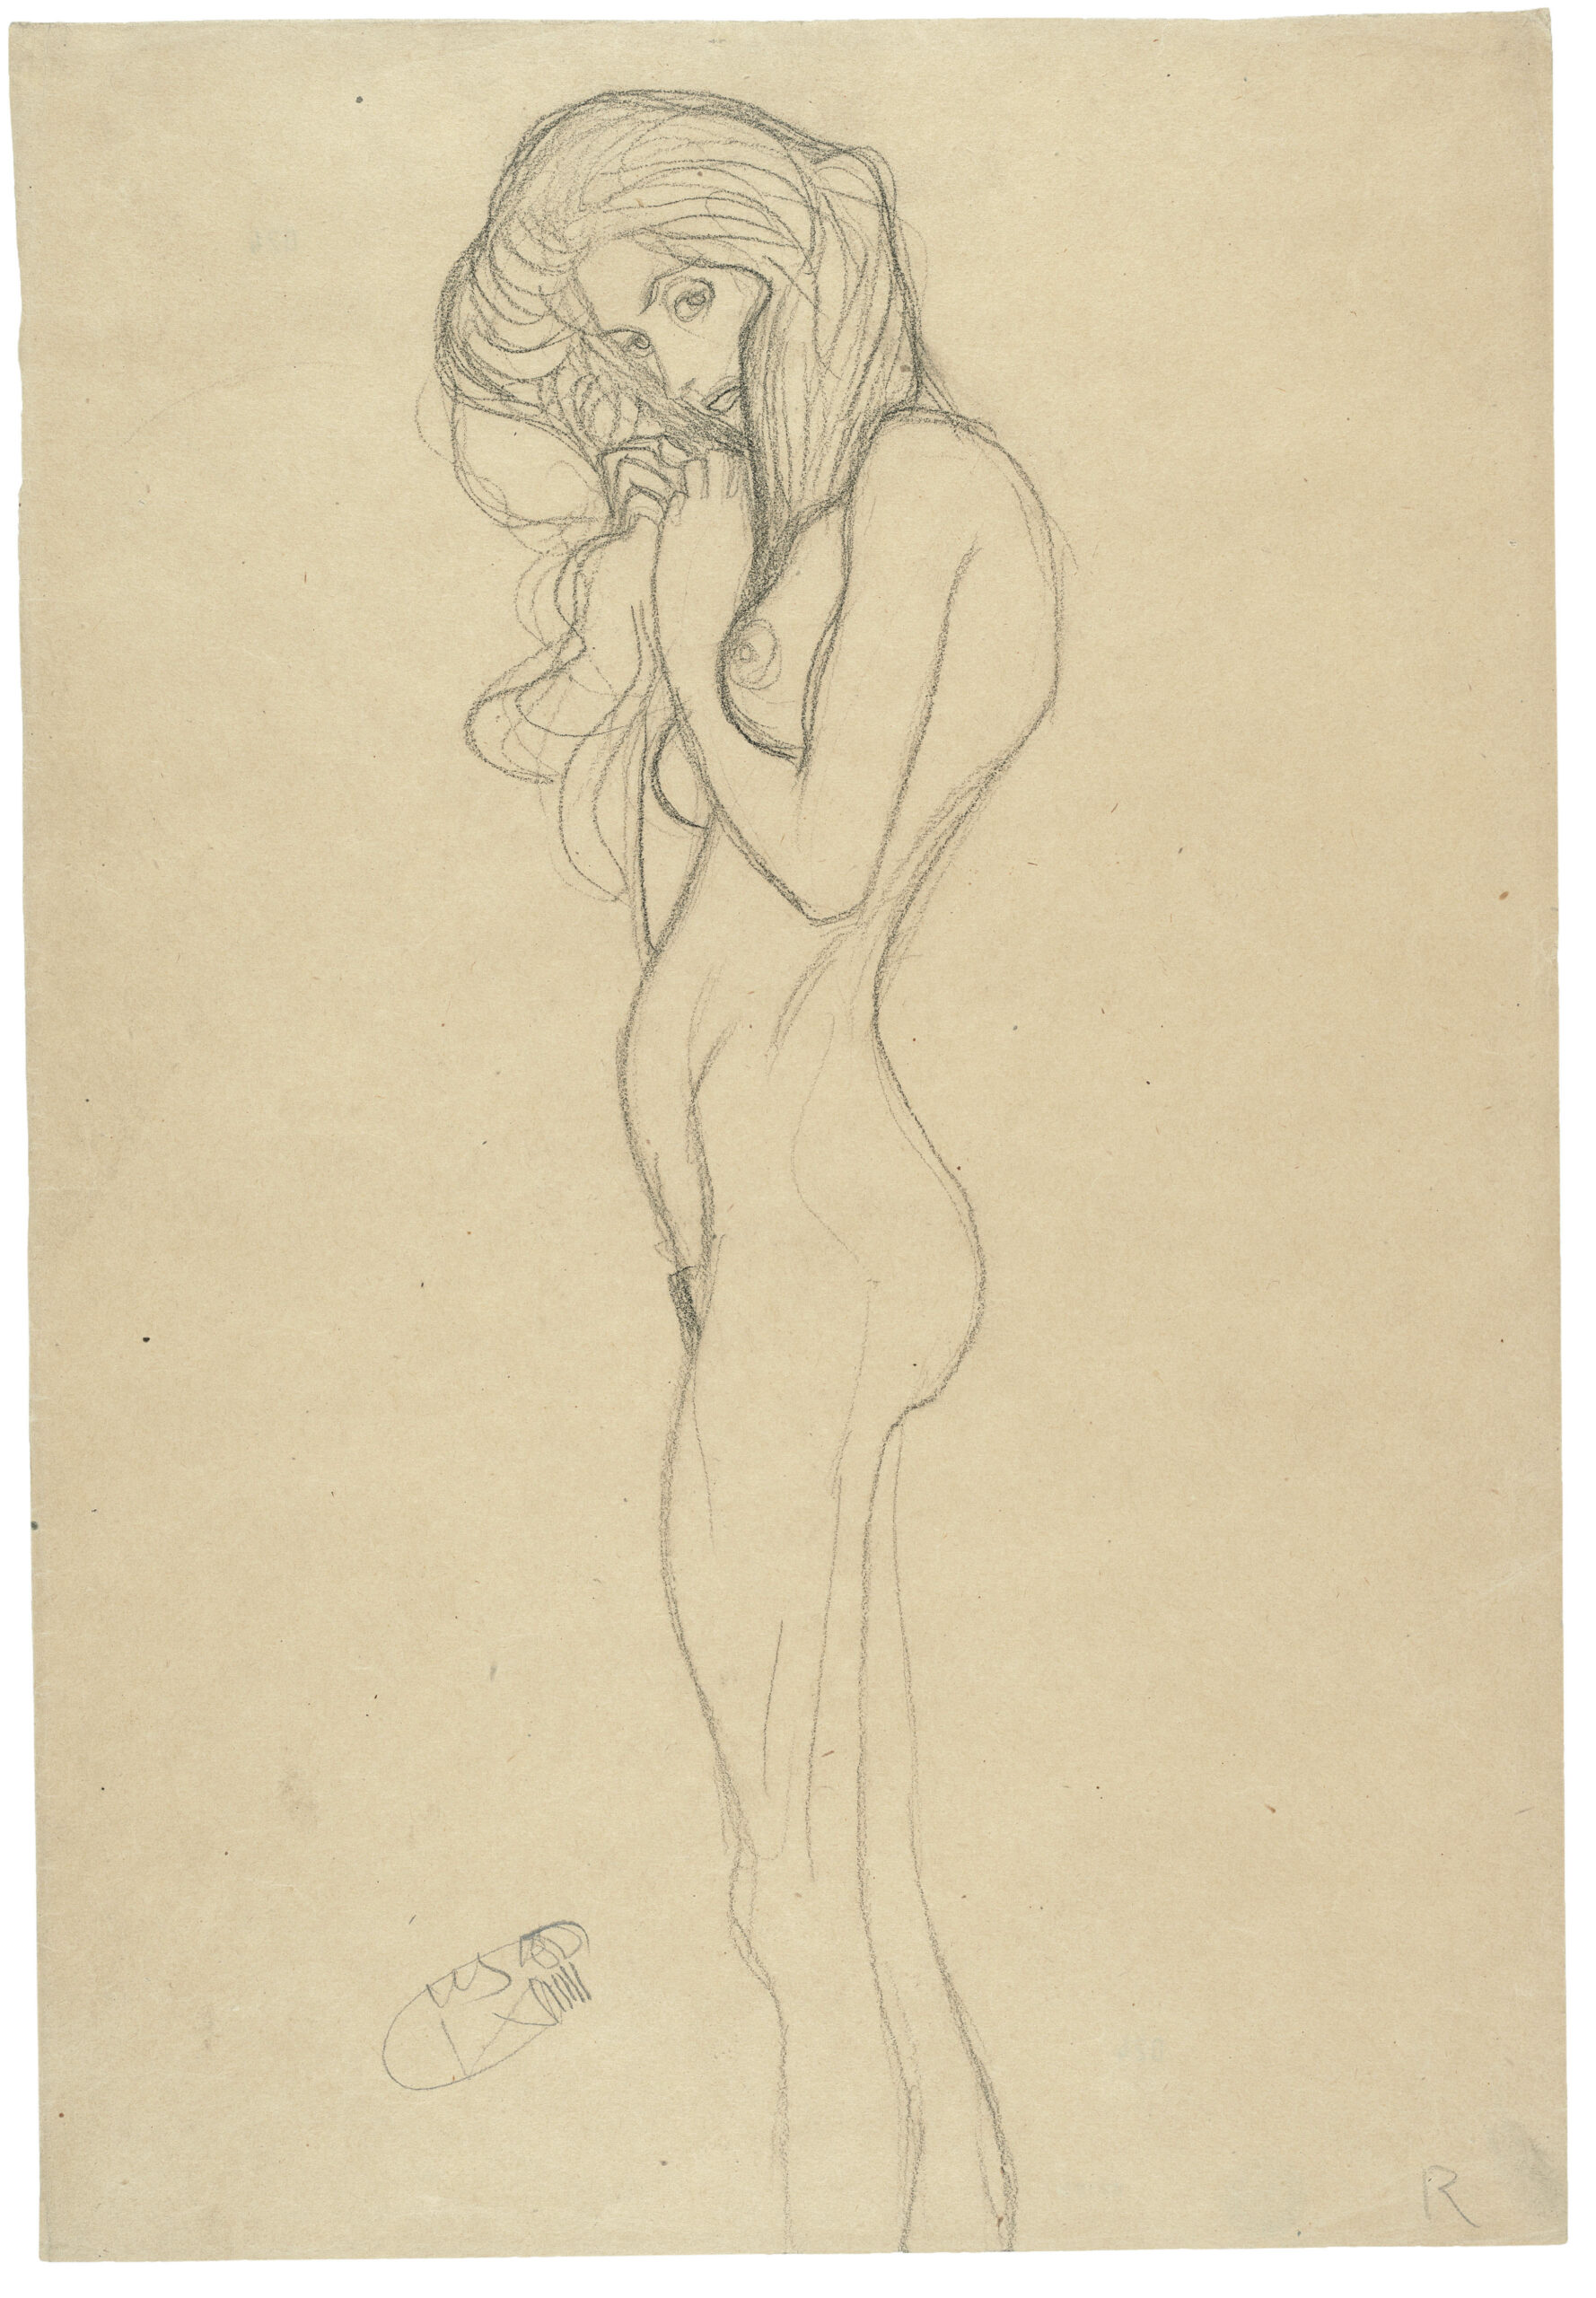 Gustav Klimt, Standing female nude, 1901, Pencil, black chalk, packing paper, The Albertina Museum, Vienna, The Batliner Collection, Exhibition, the Royal Academy of Arts, London, the Albertina Museum, Vienna